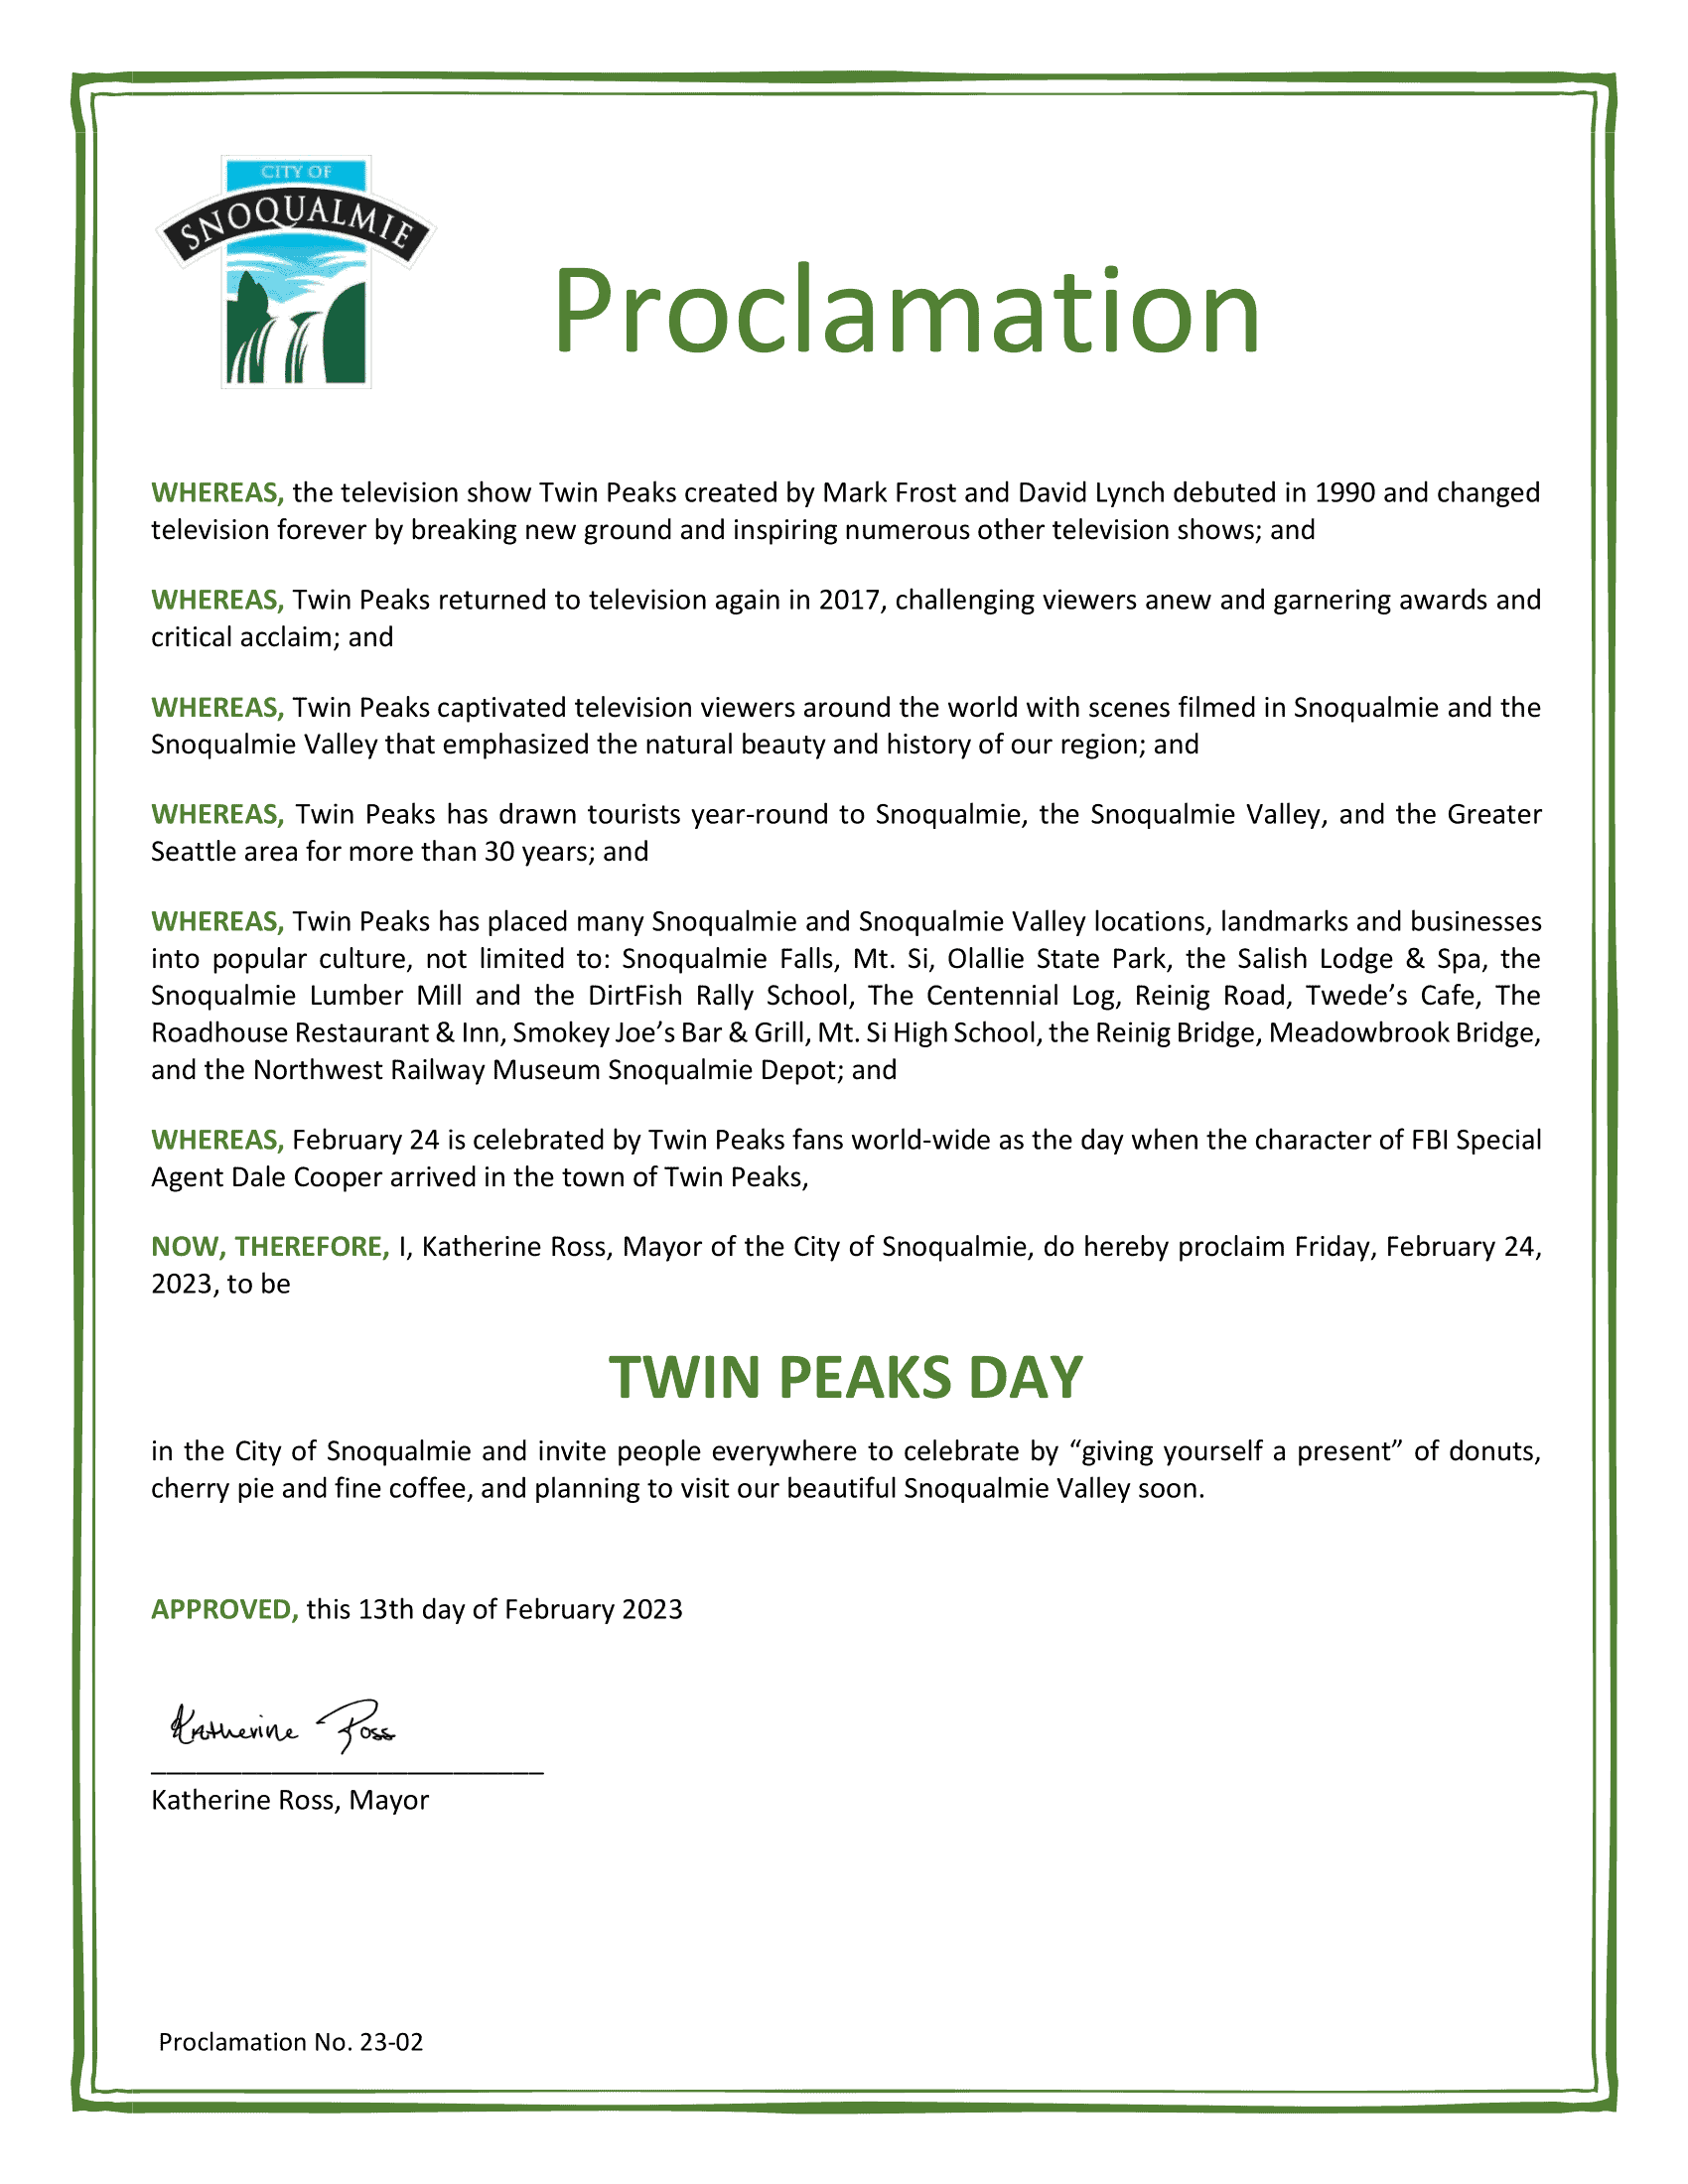 Snoqualmie Proclamation Twin Peaks Day February 24 2023 1